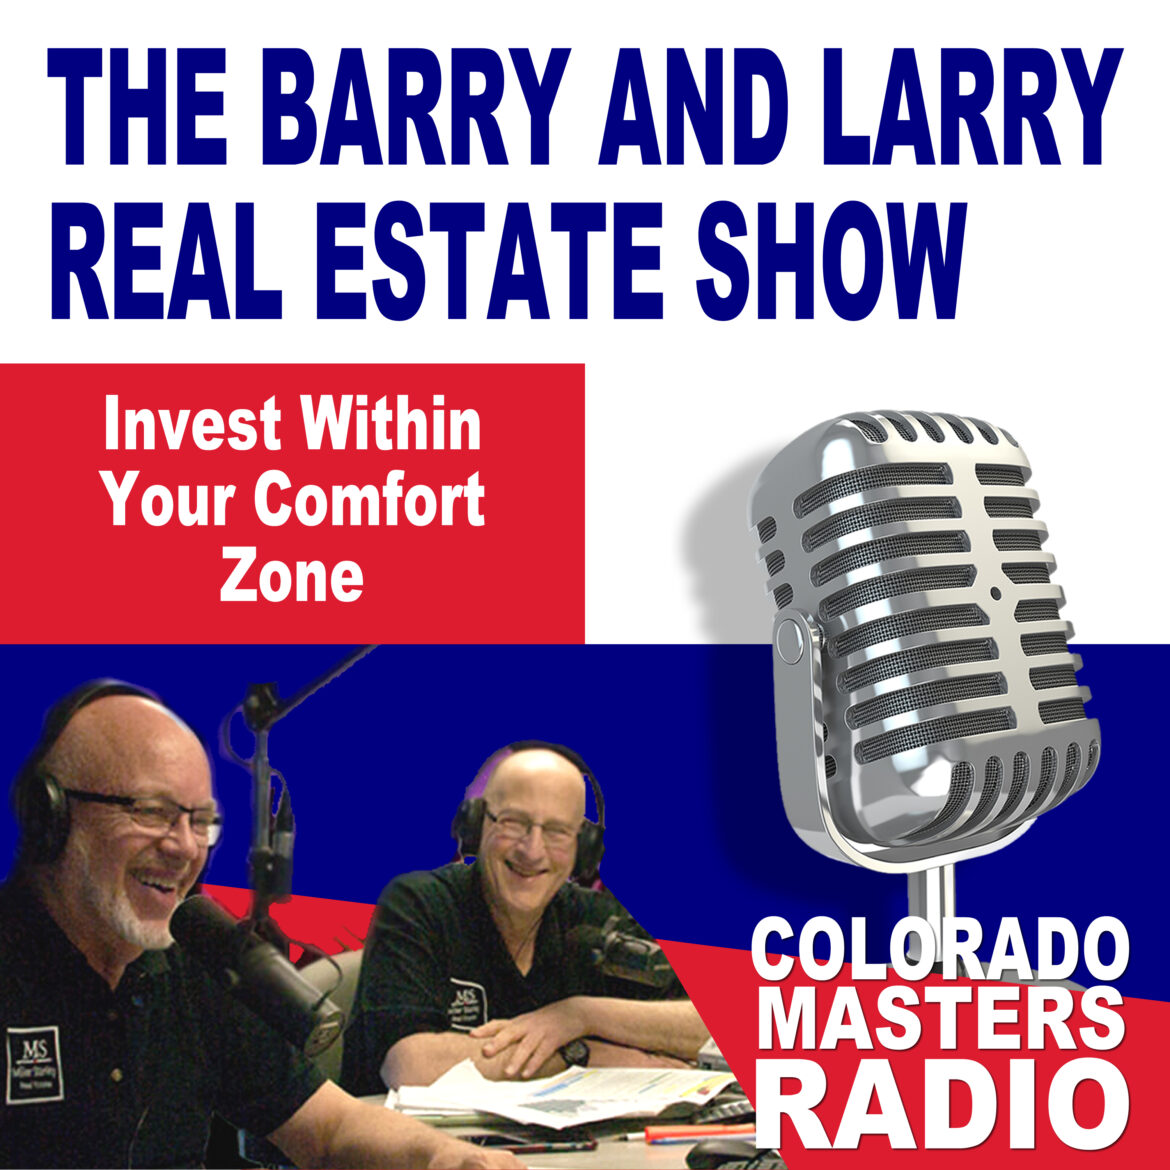 The Larry and Barry Real Estate Show - Invest Within Your Comfort Zone